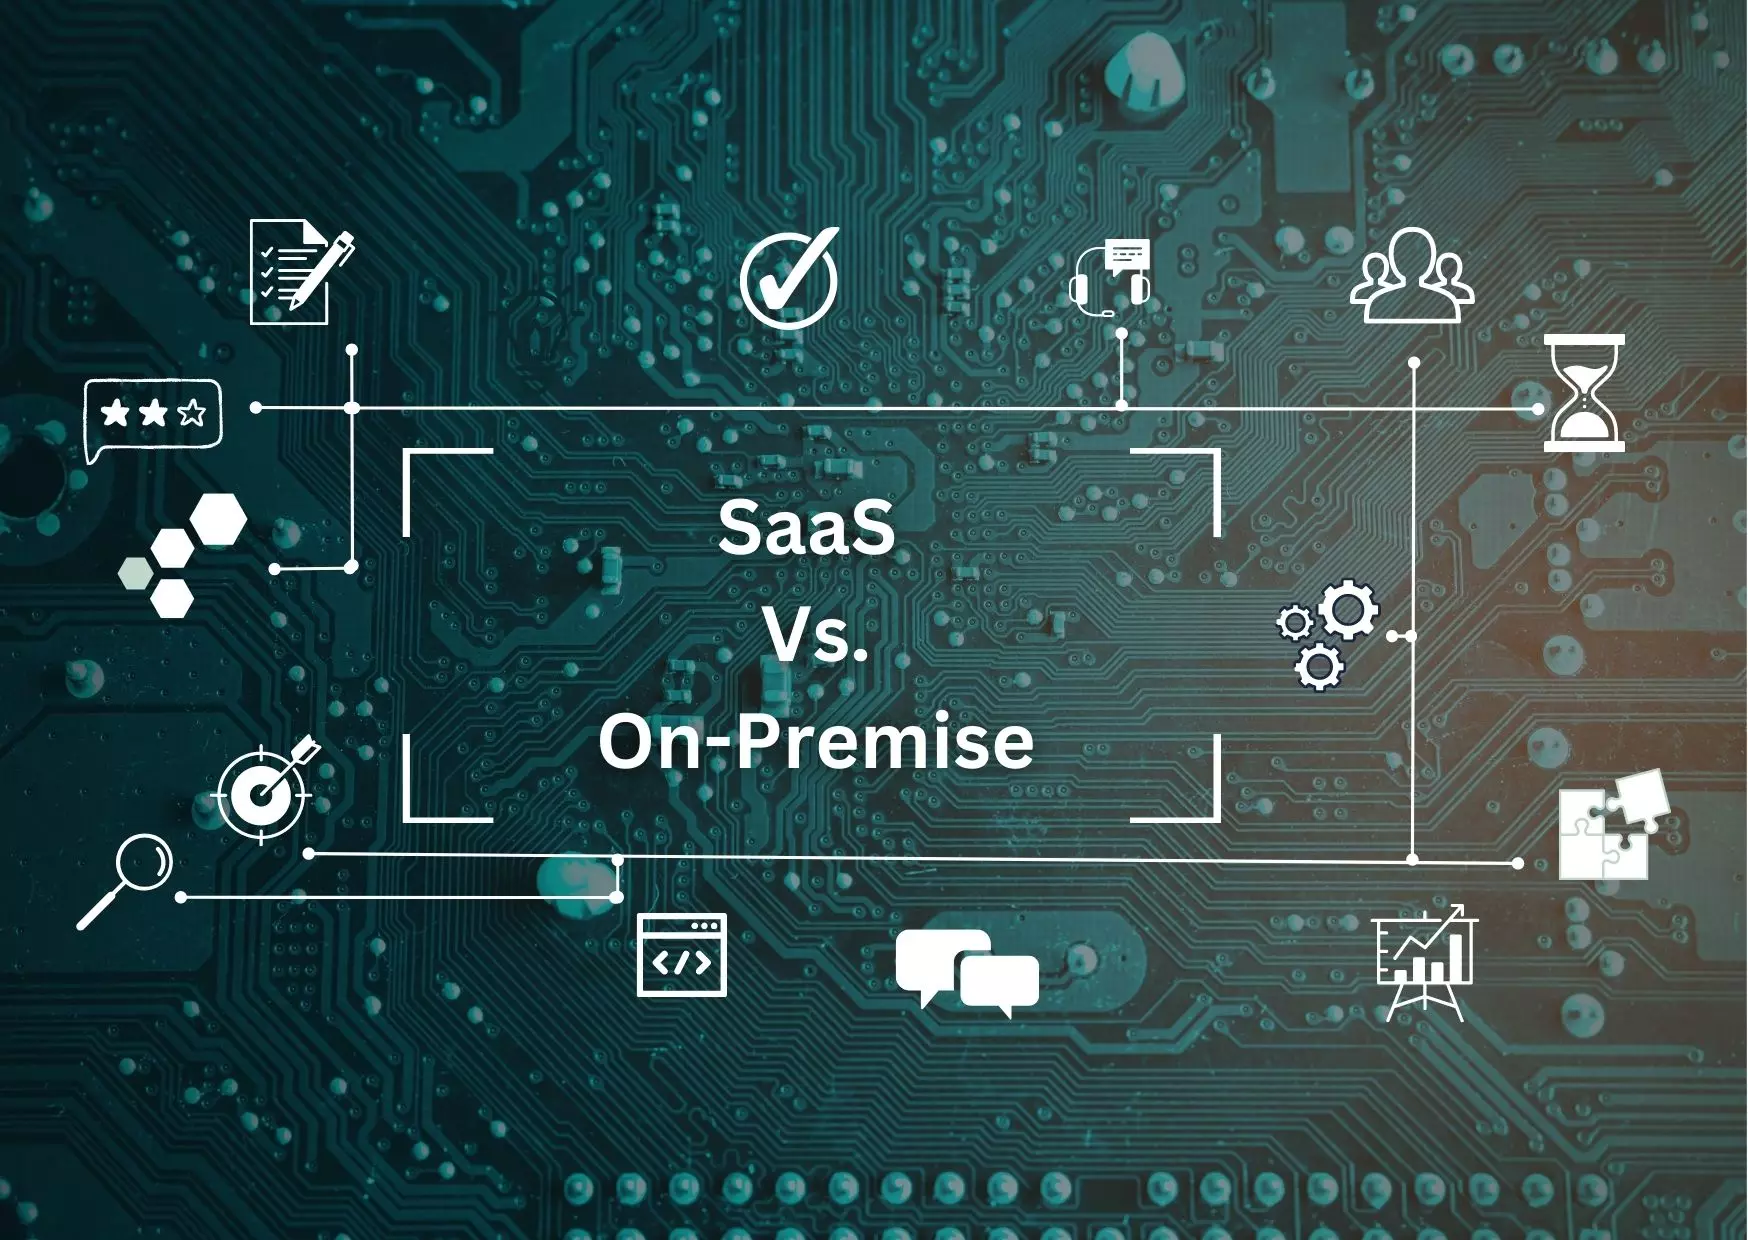 SaaS vs. On-Premise - Pros and Cons